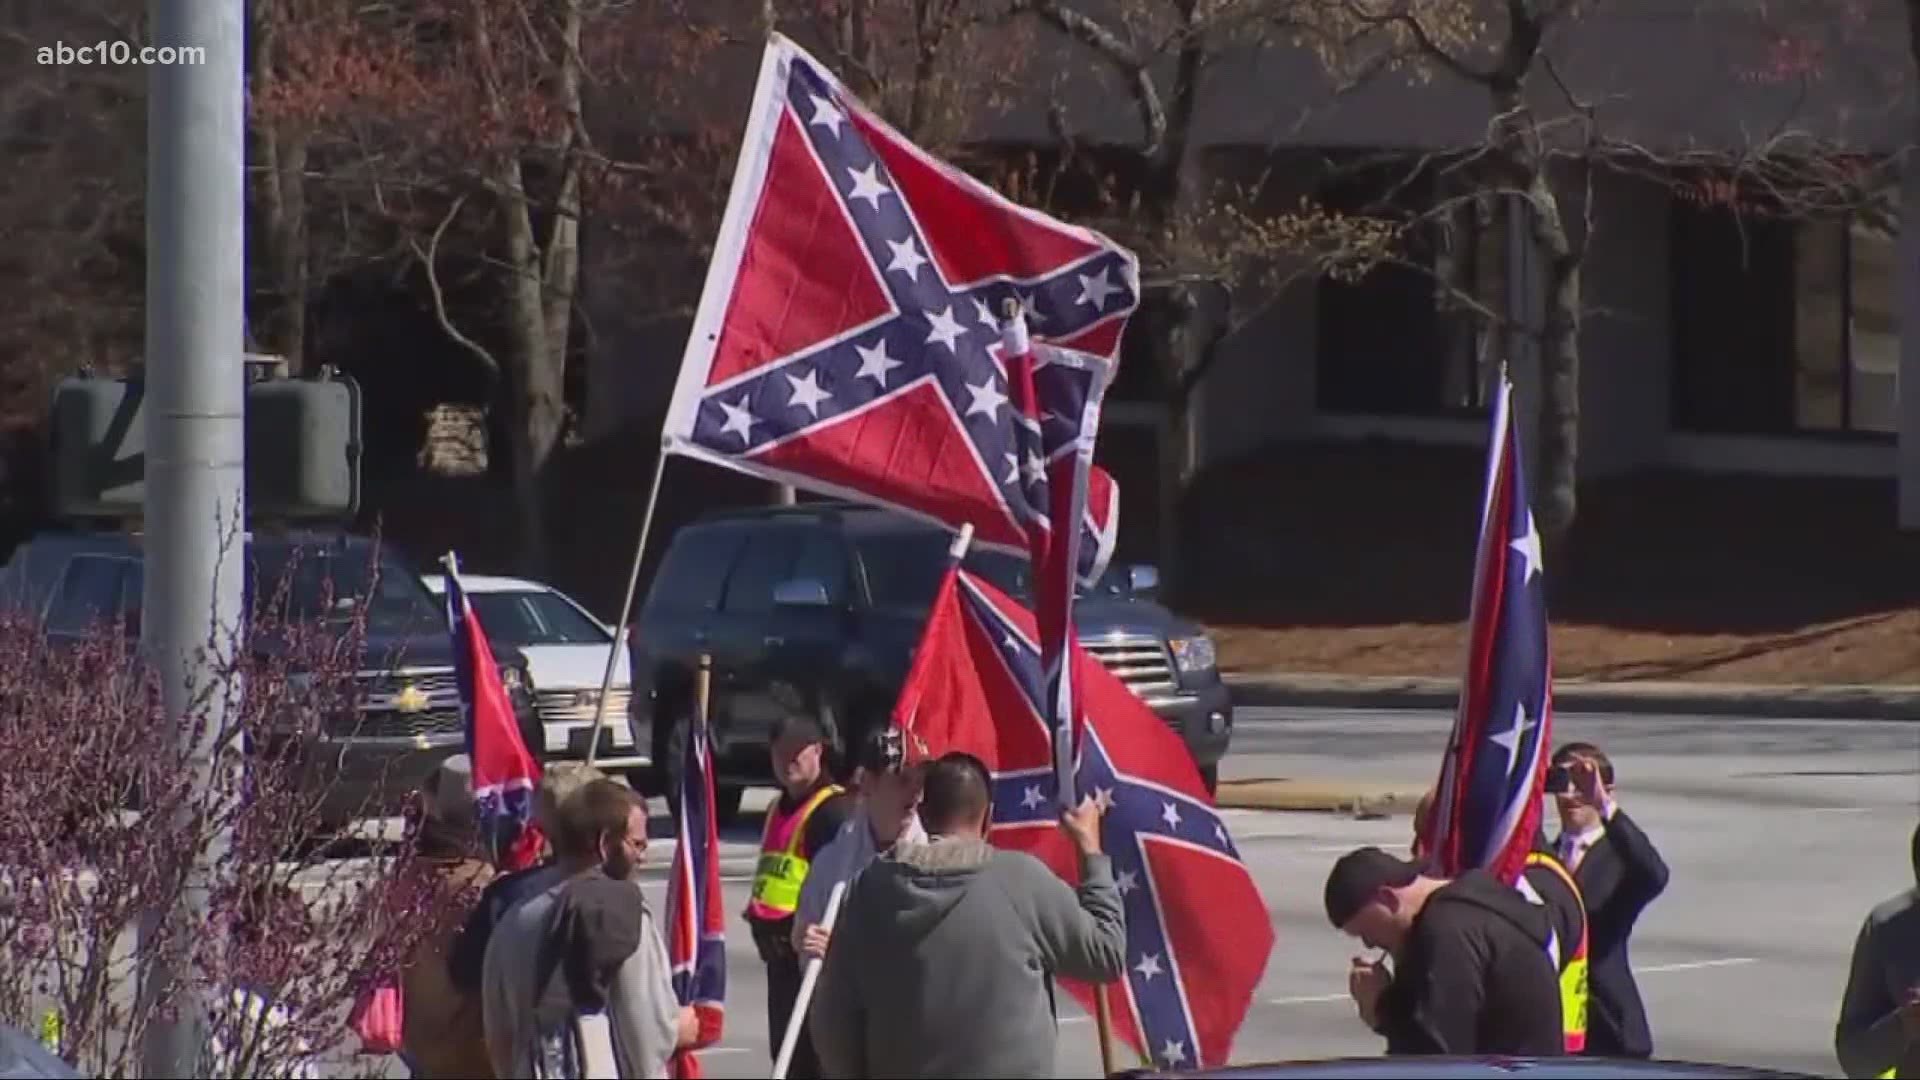 The Confederate flag's ties with slavery are why many people find the flag offensive.